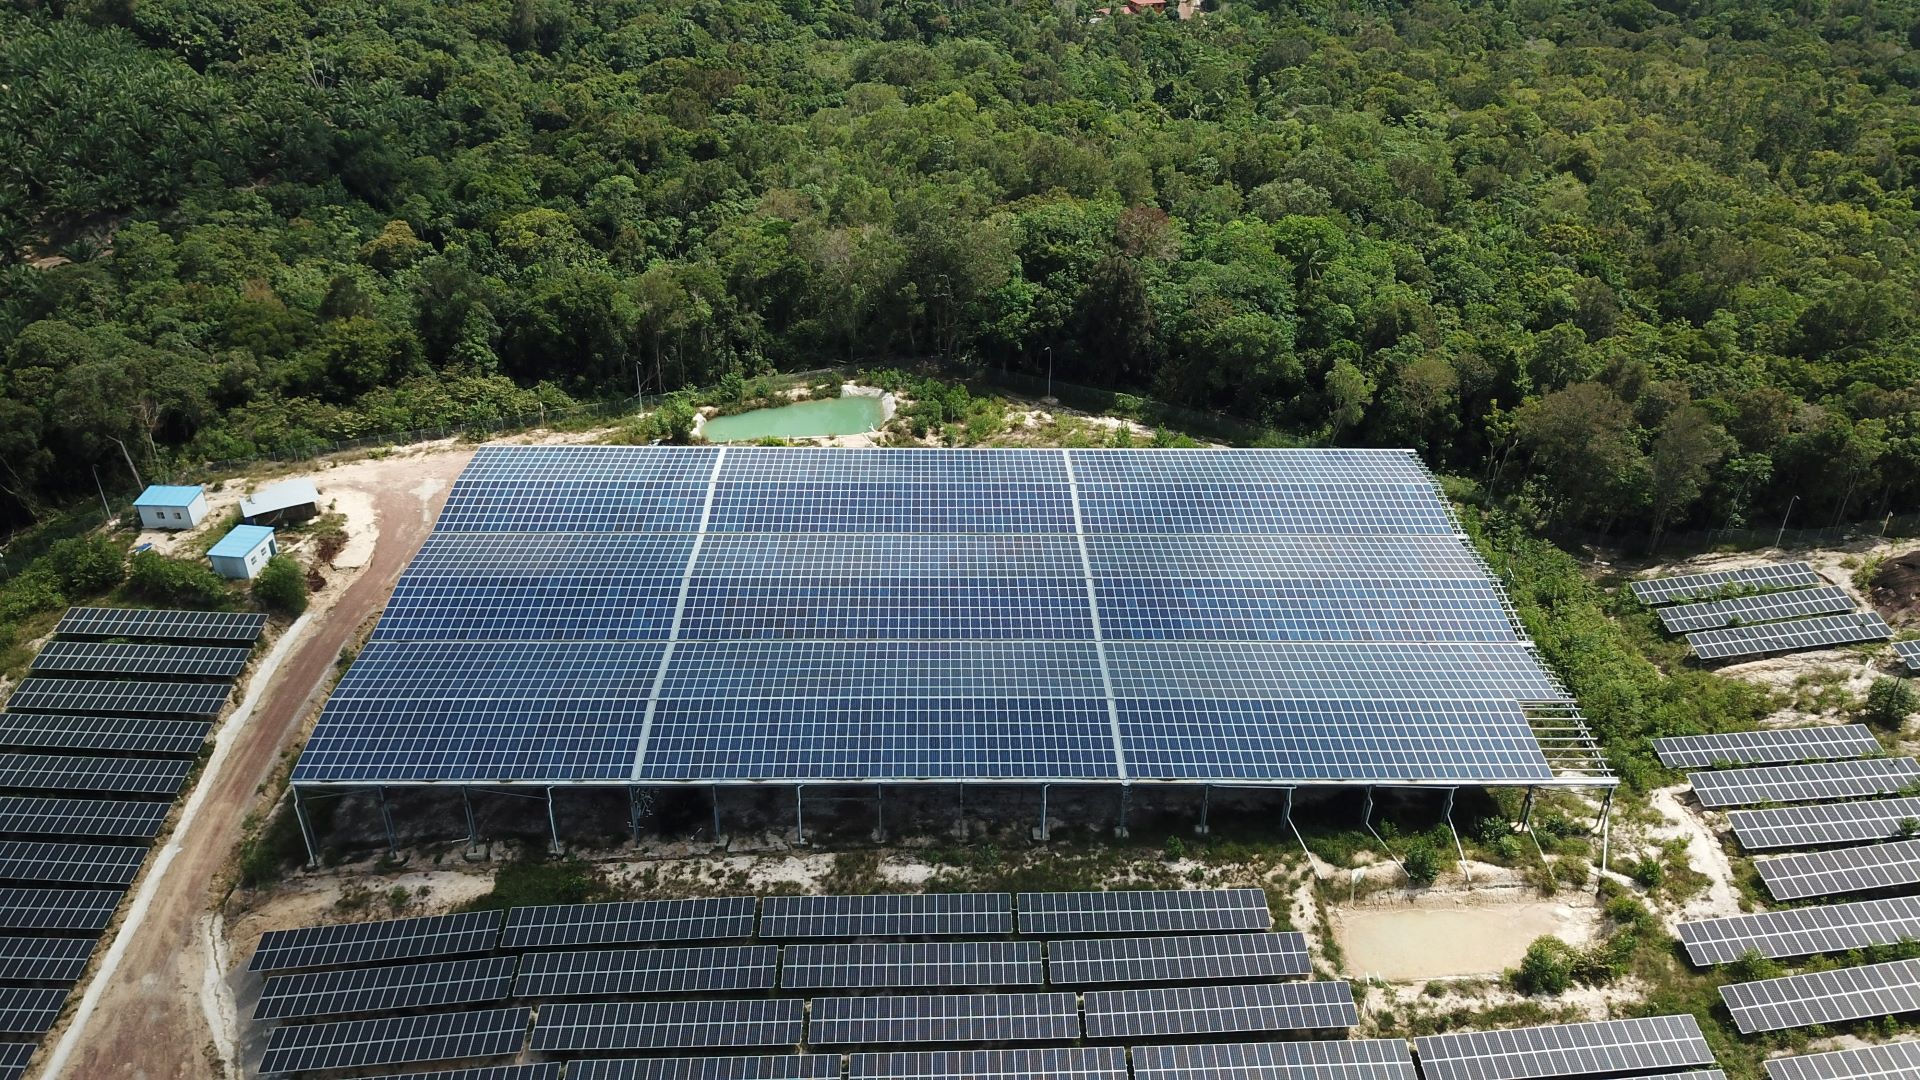 solar panels lined up in solar farm in rainforest clearing